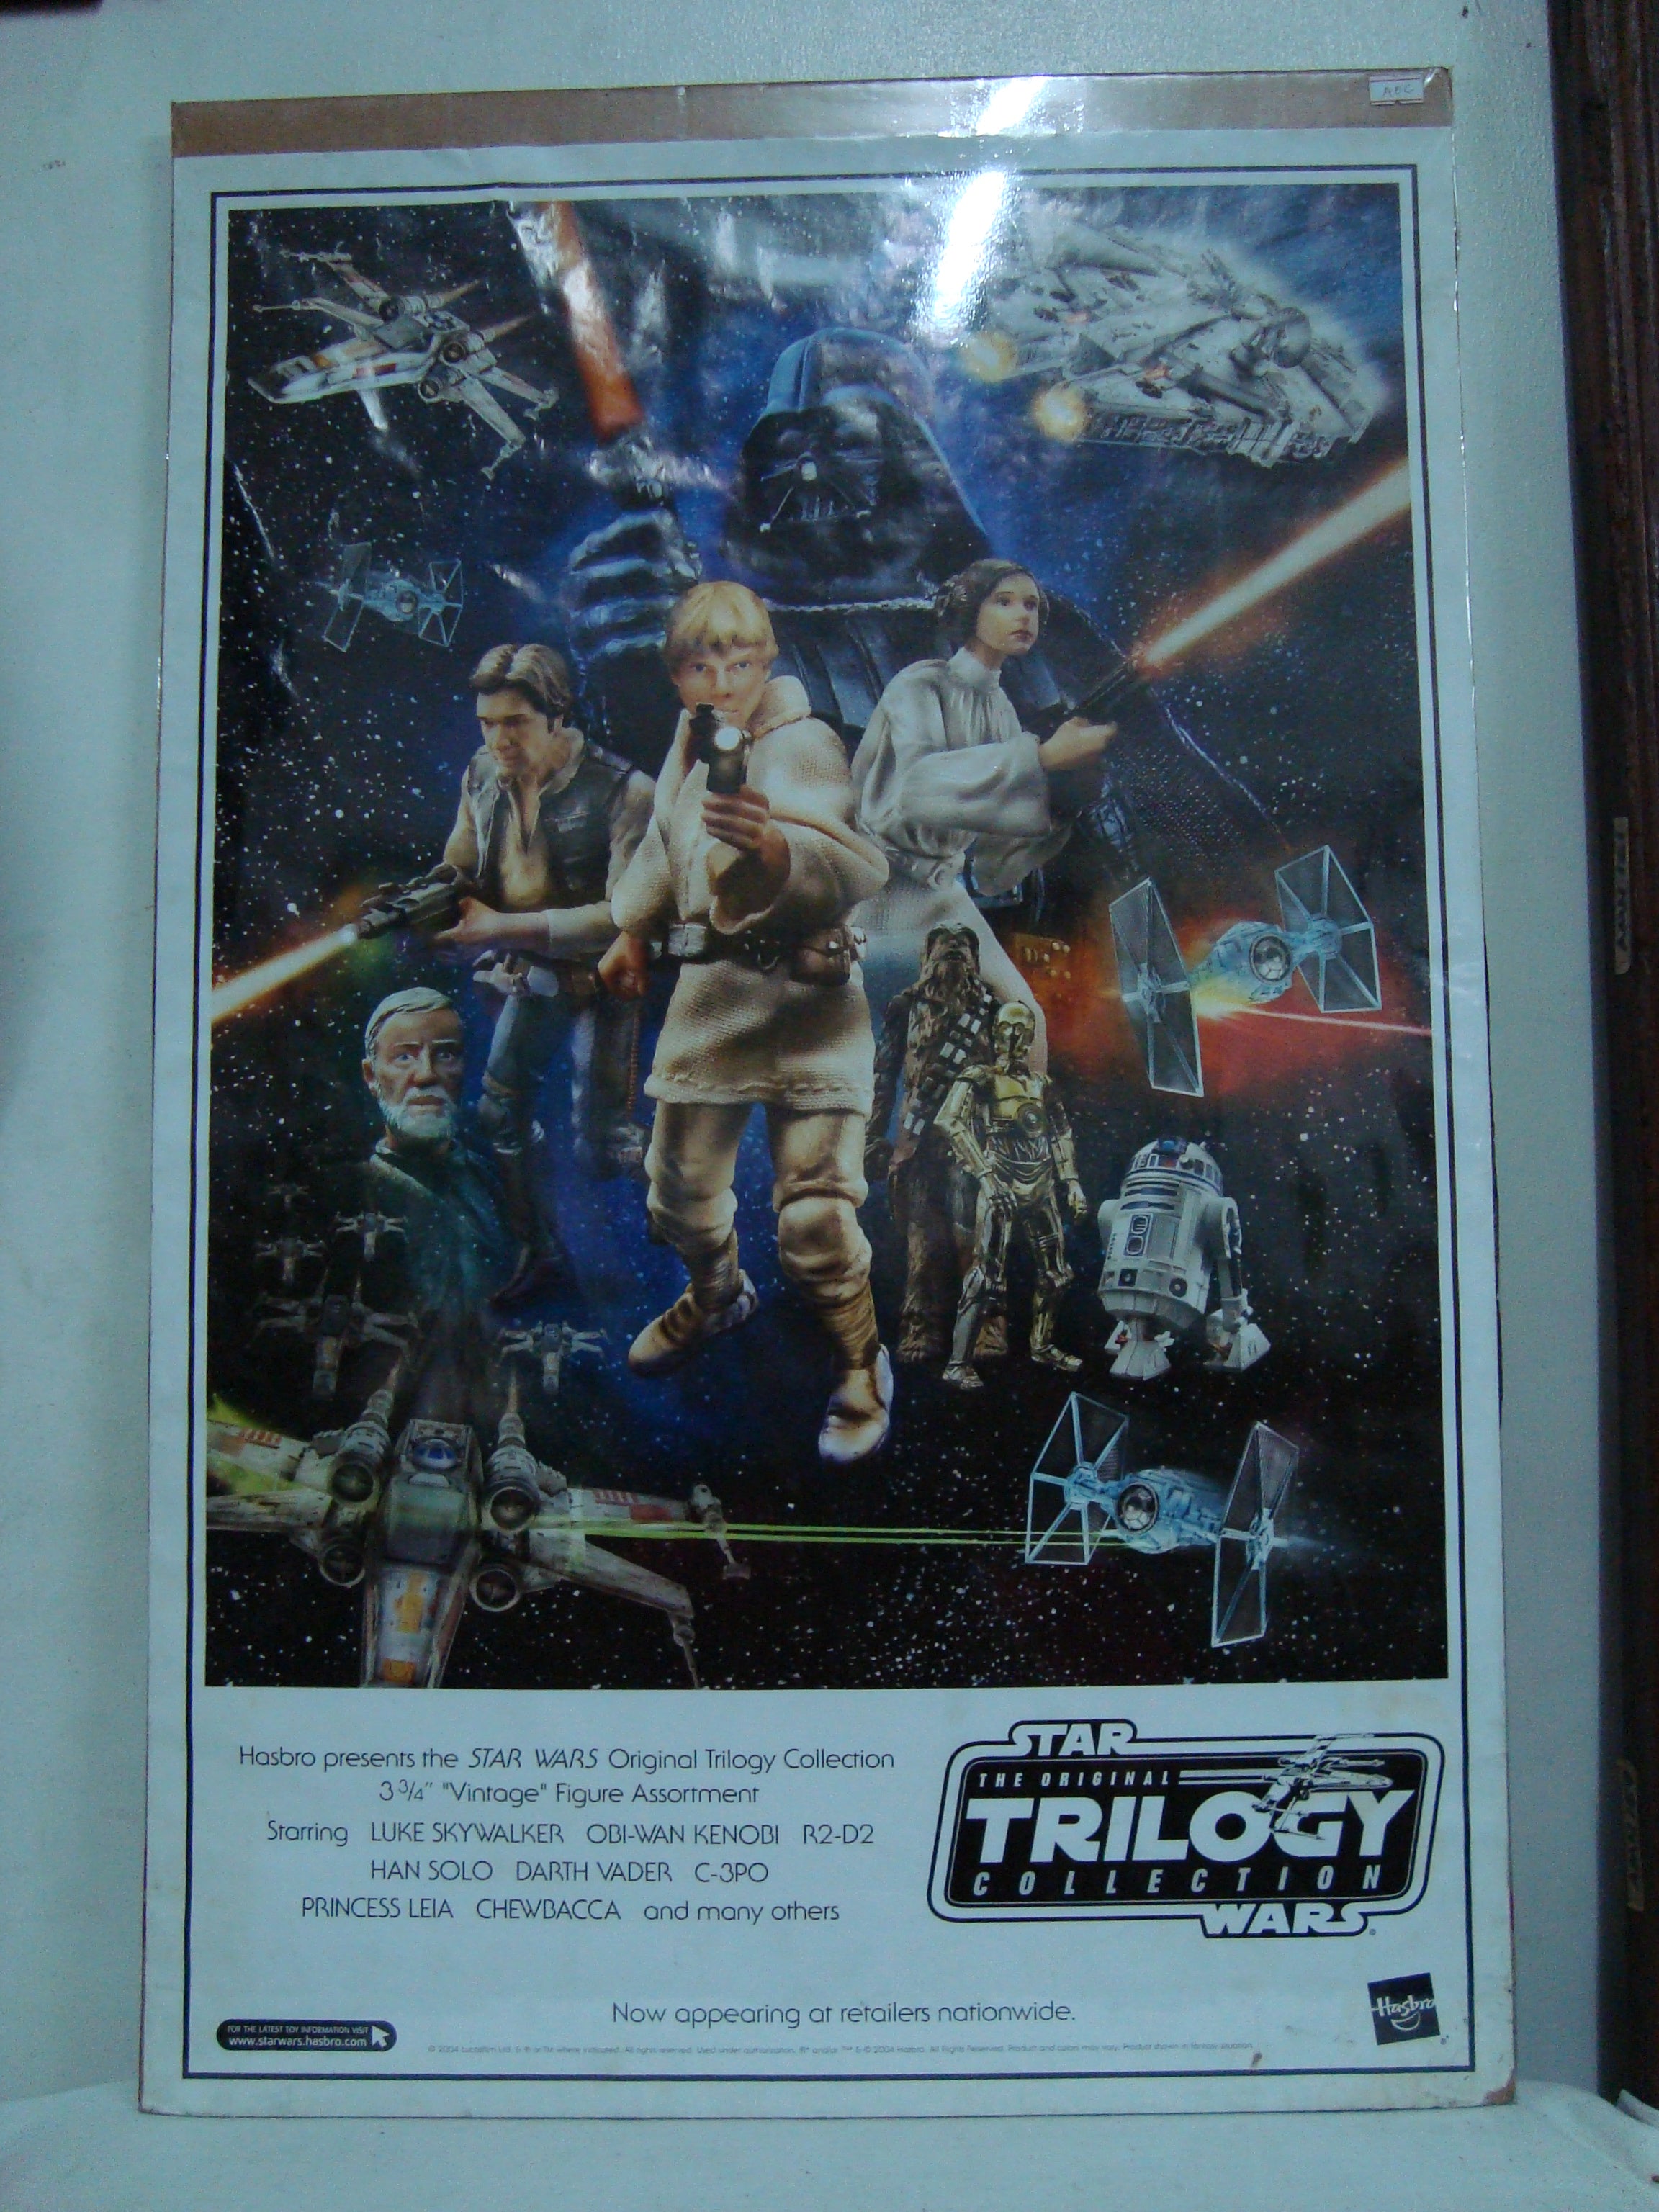 Star Wars The Original Trilogy Collection